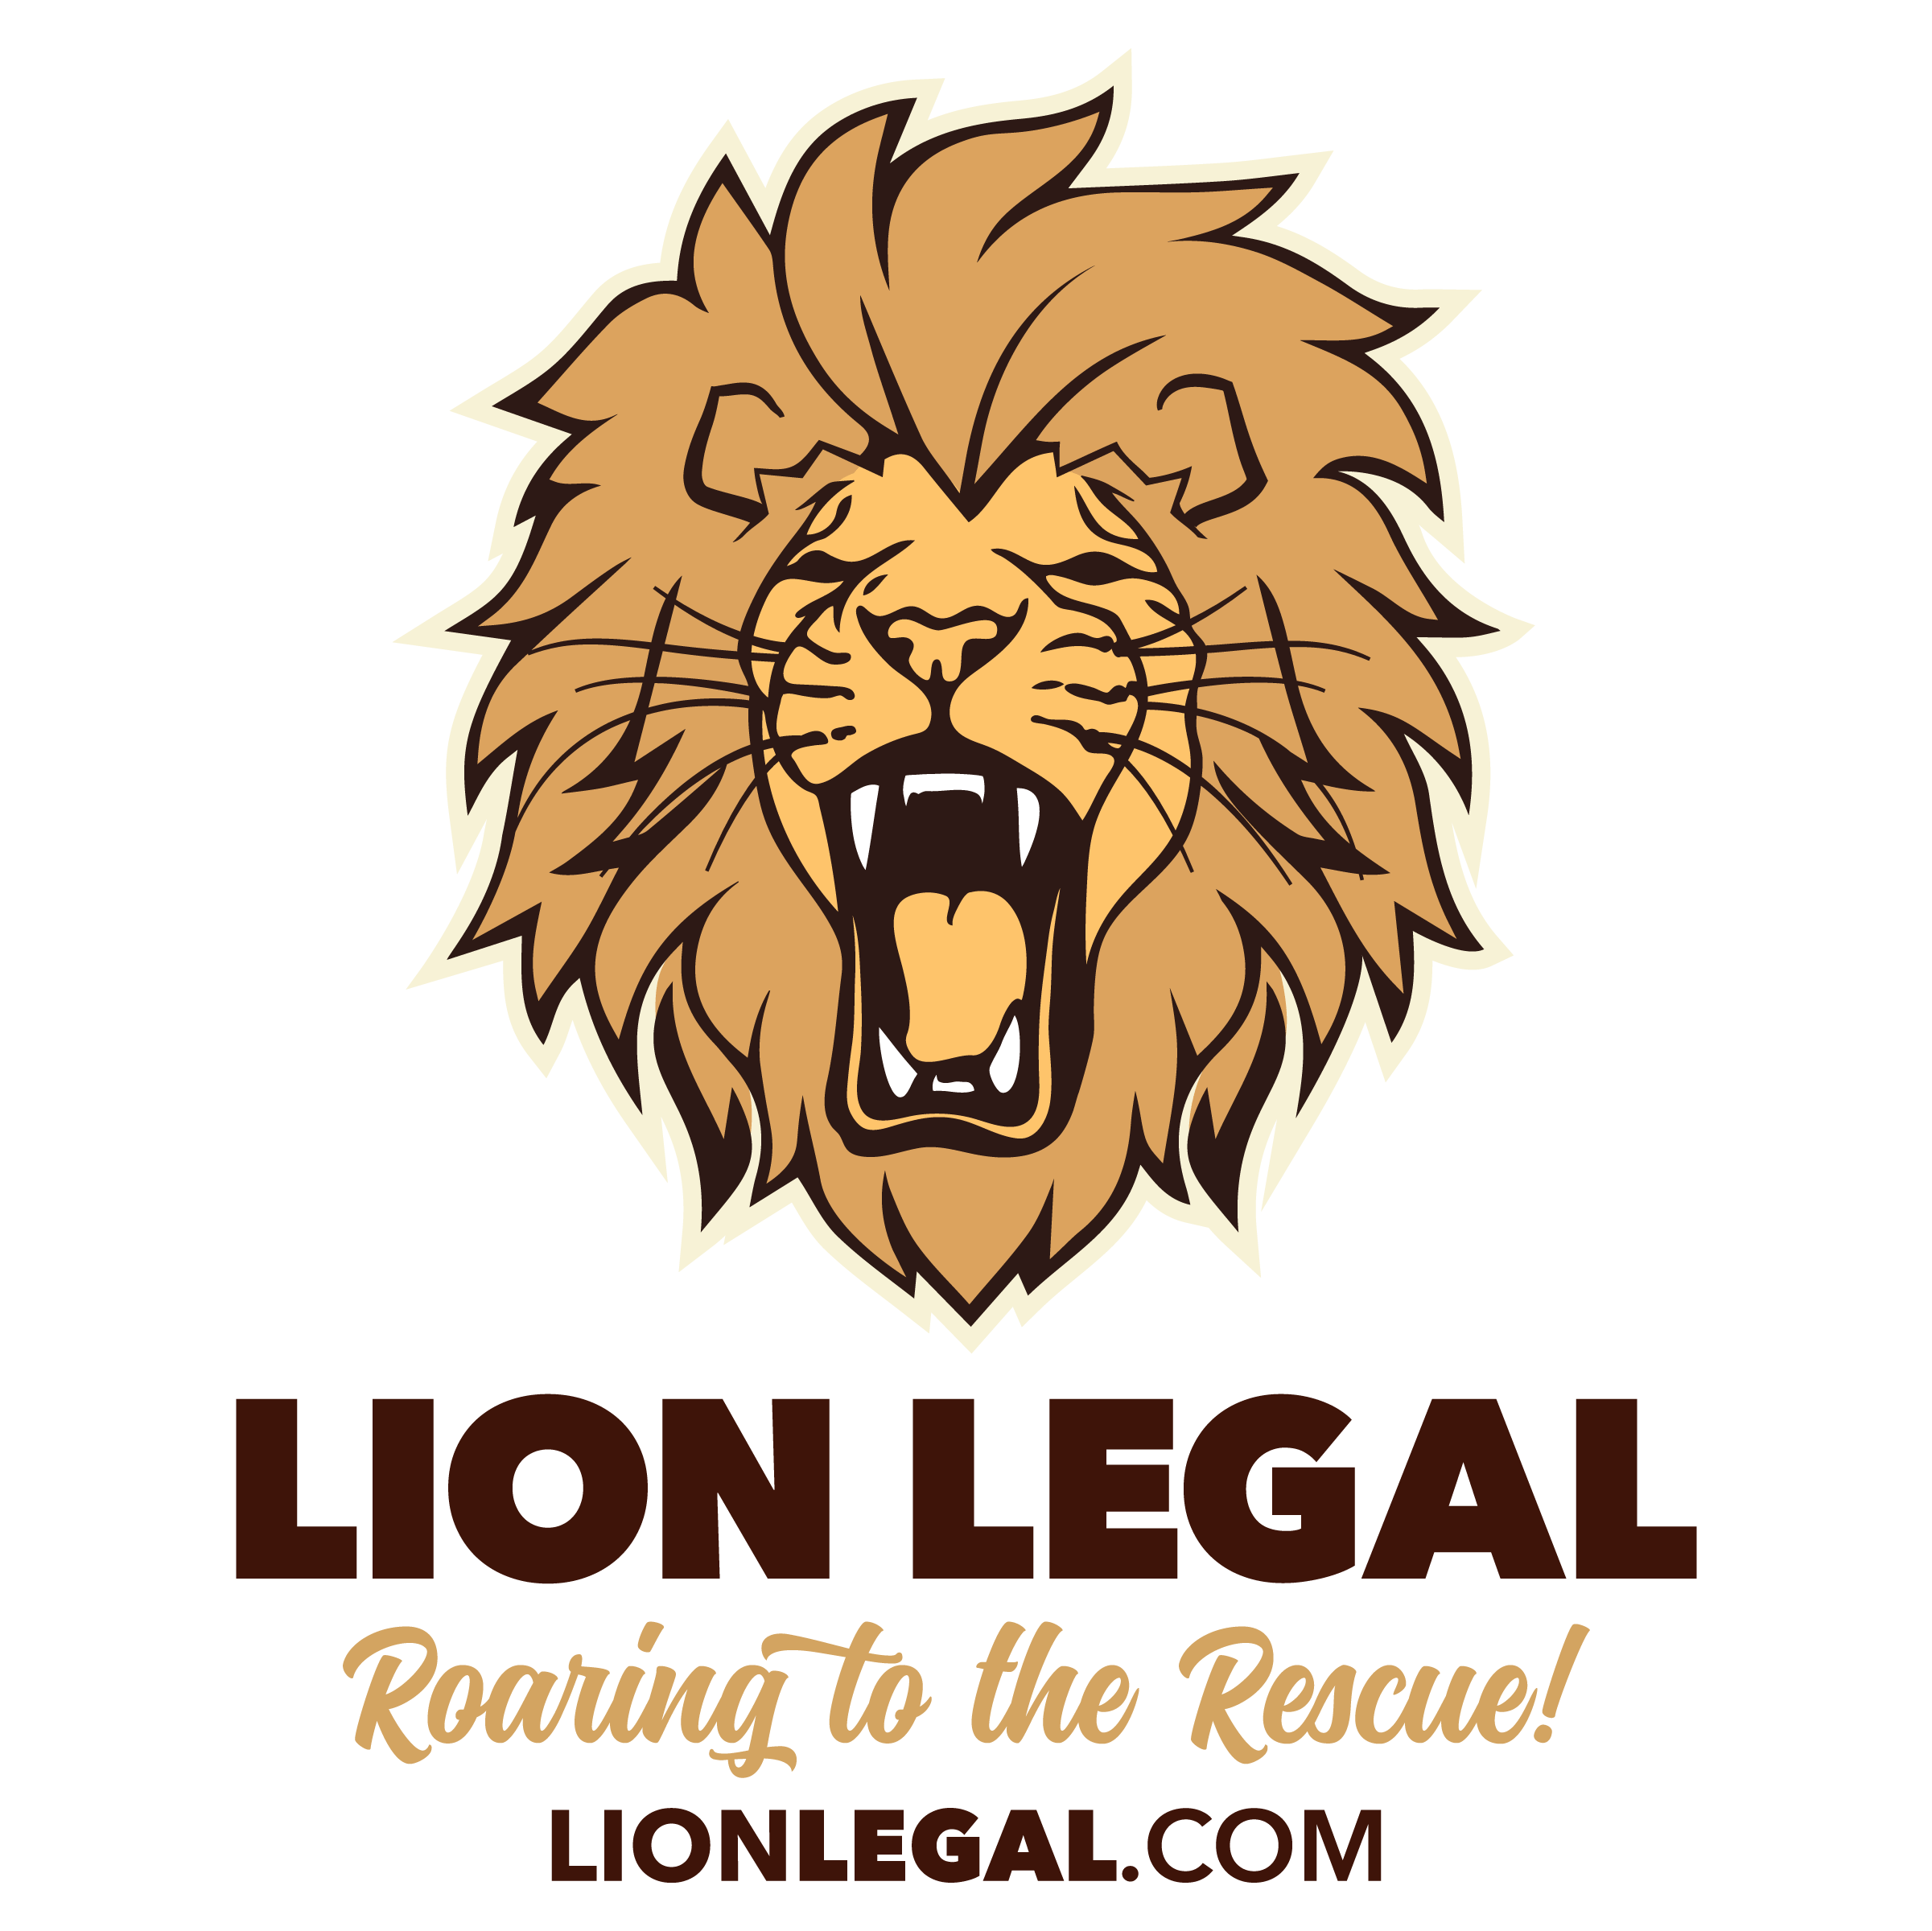 This is the logo of Lion Legal Services, the Law Firm for Working Arkansans.